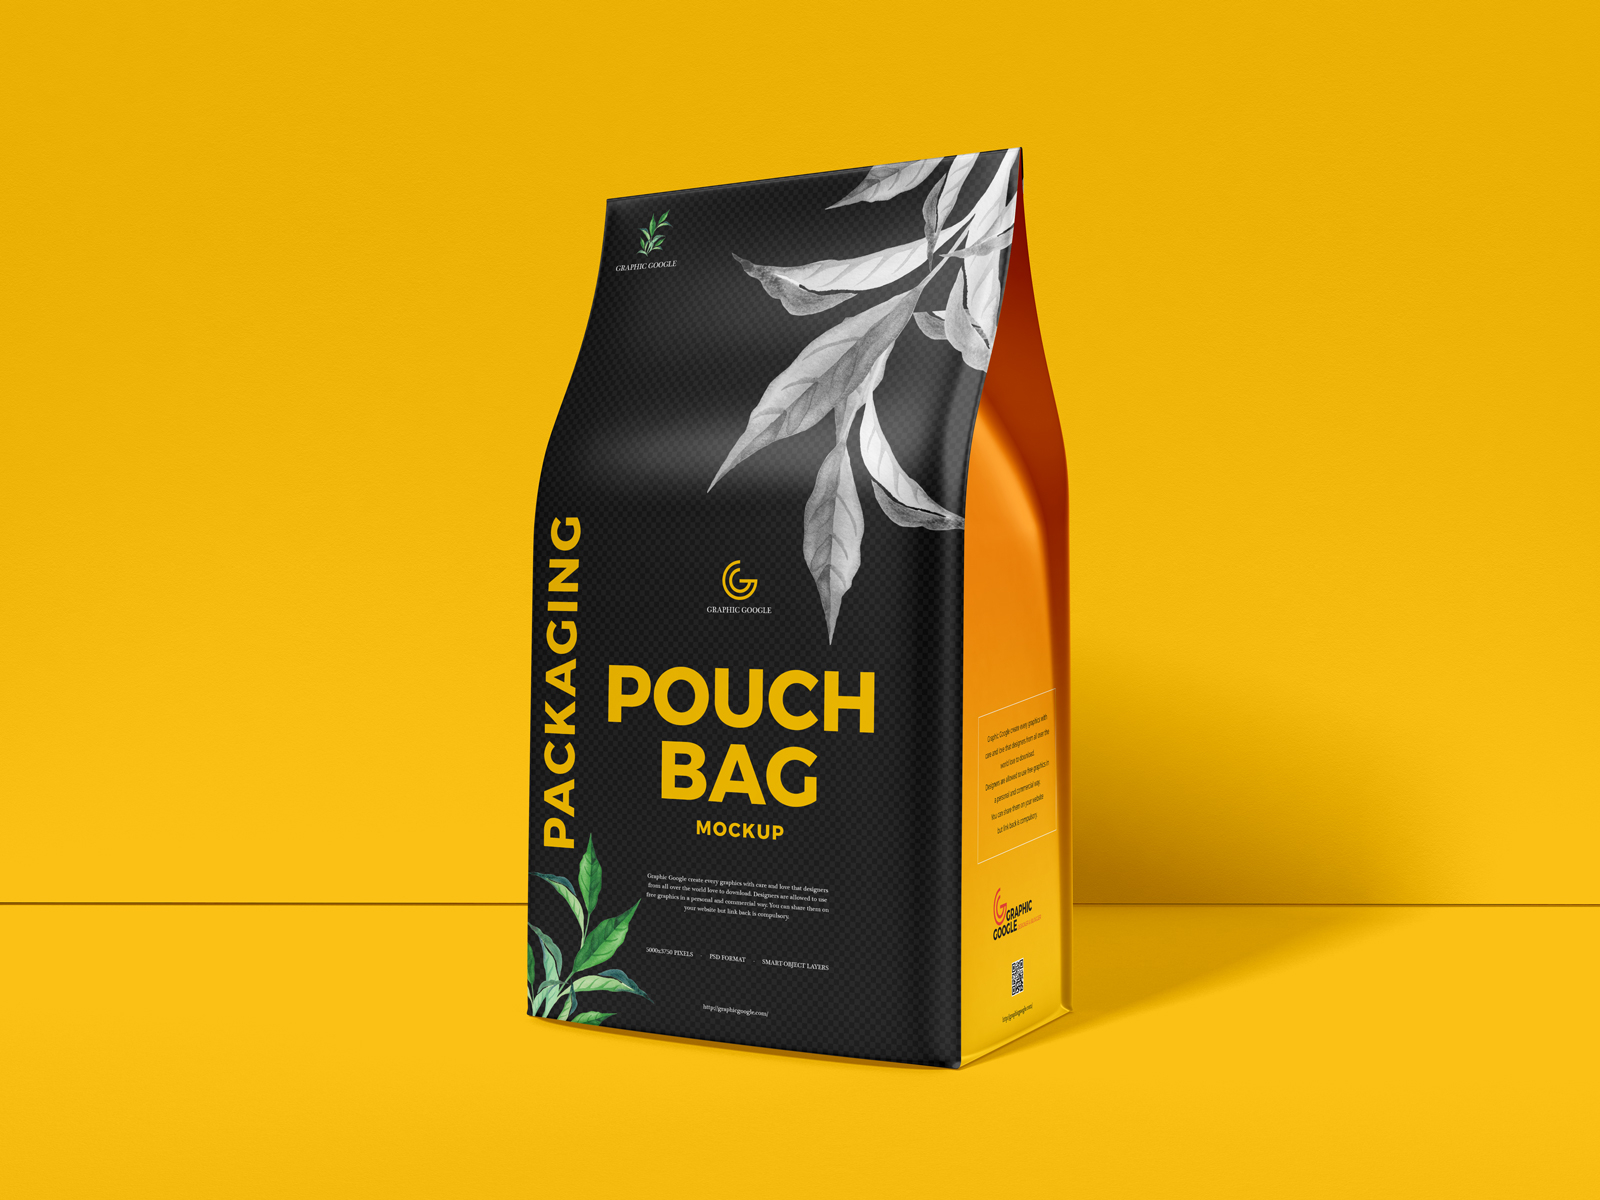 Download Free Packaging Pouch Bag Mockup by Graphic Google on Dribbble